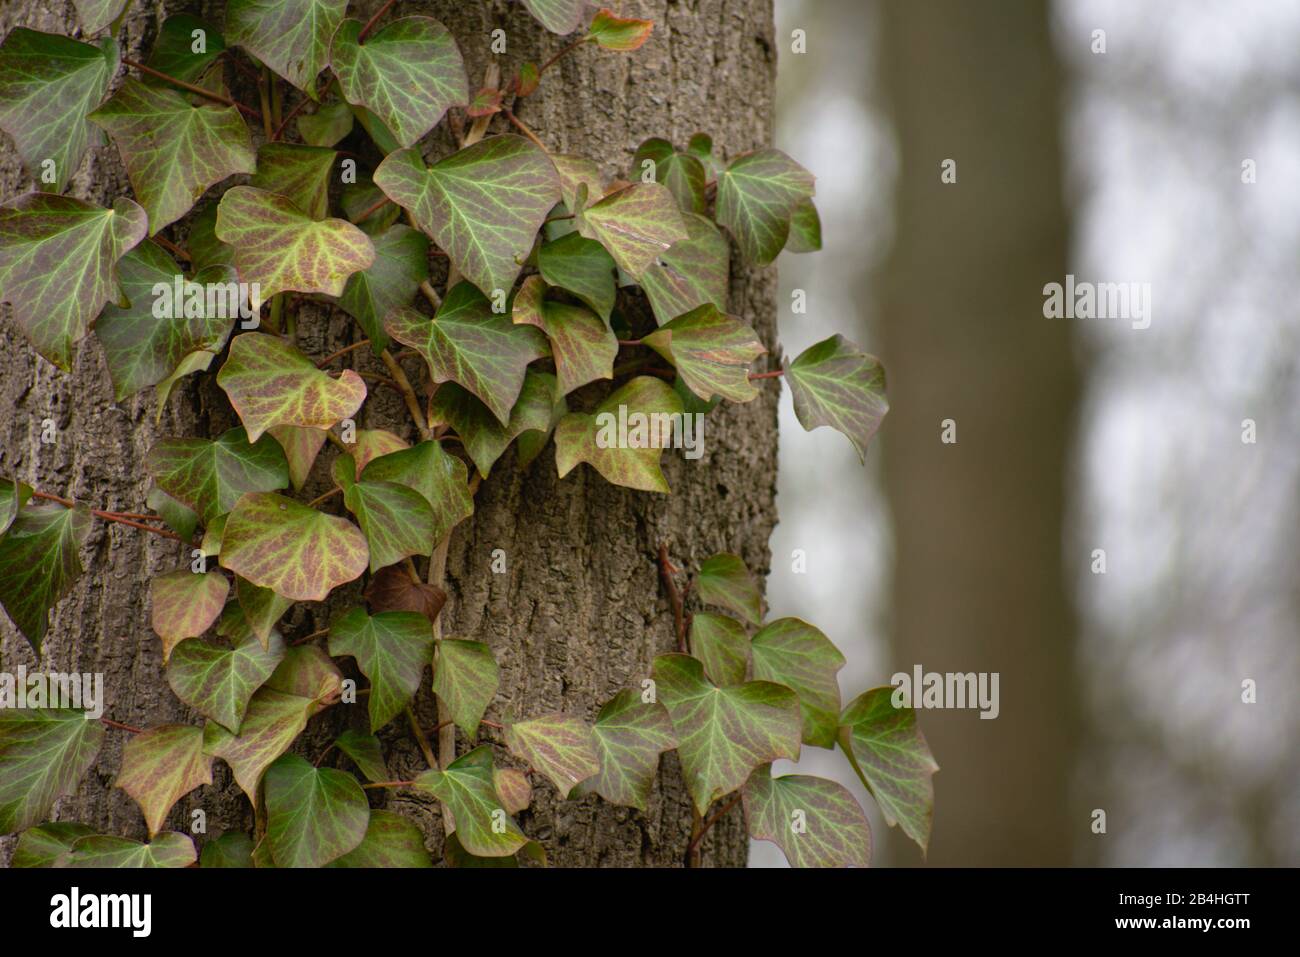 Weissensee Jewish Cemetery European ivy creeping up a tree closeup in Berlin Stock Photo